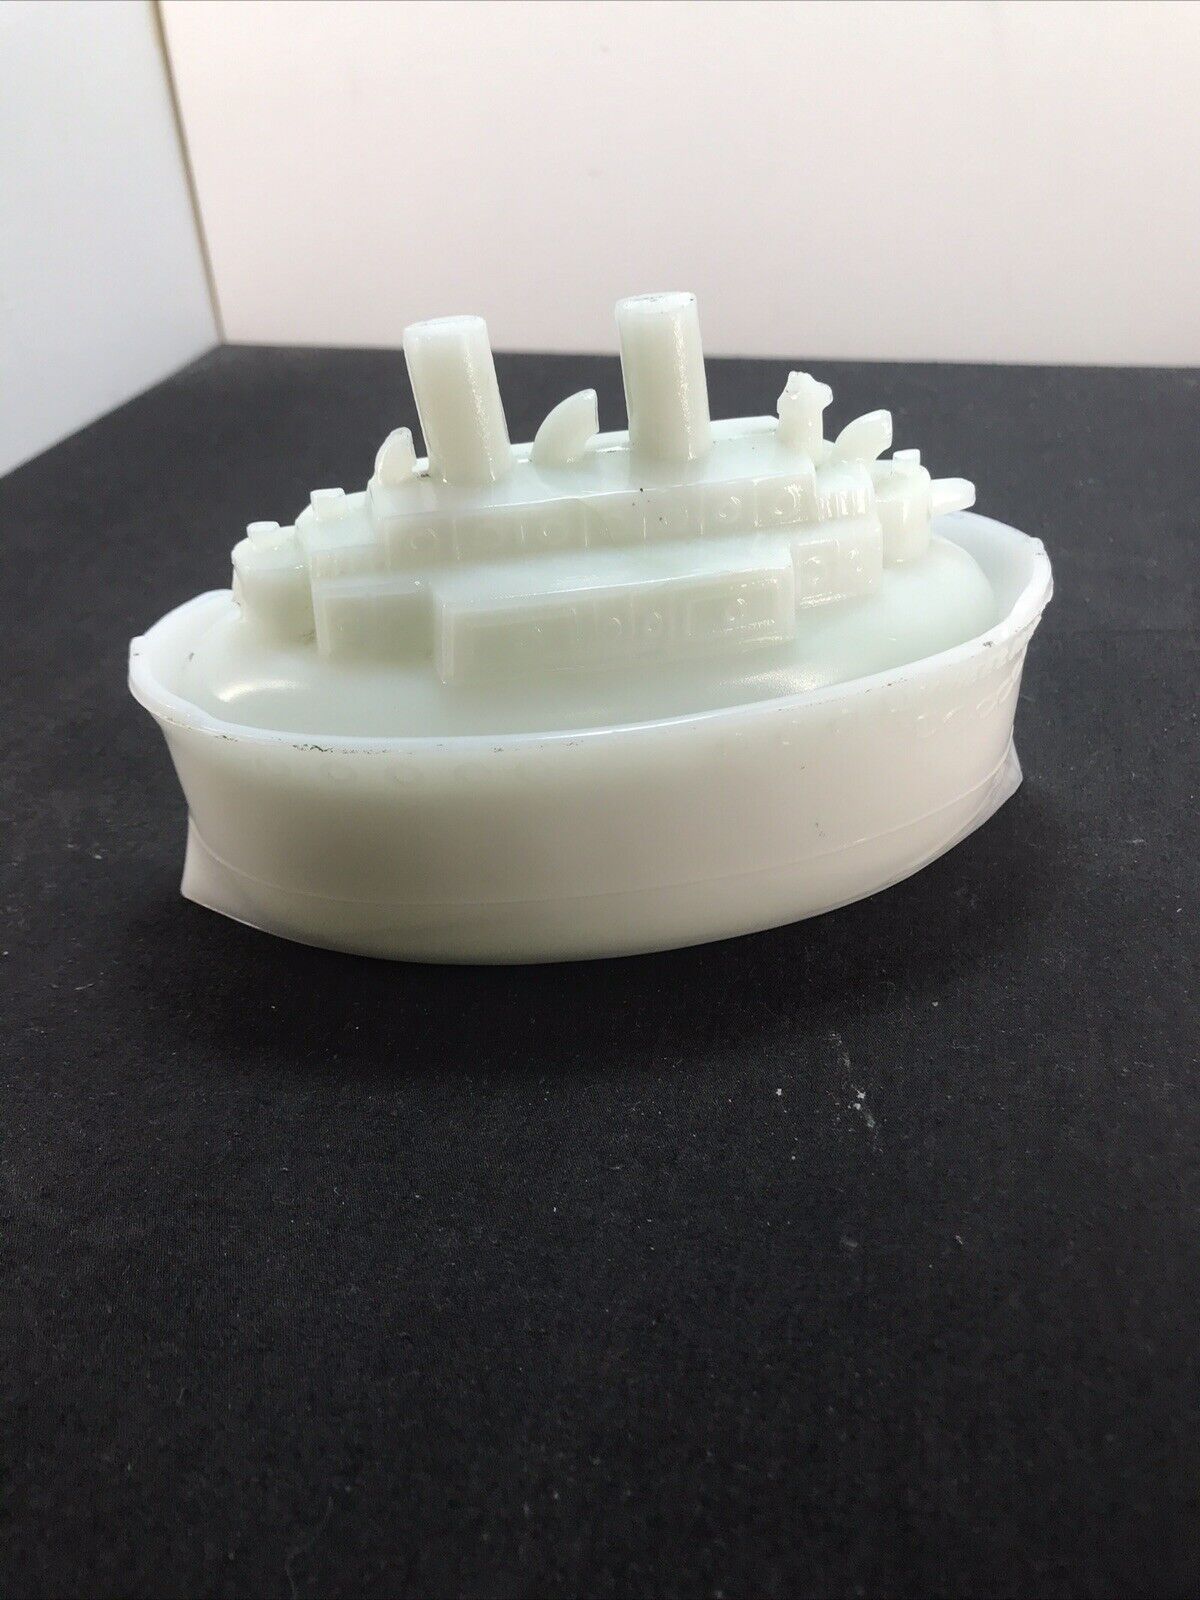 Antique CL Flaccid Wh. Milk Glass Battleship Boat Covered Mustard Dish 1898 6x4